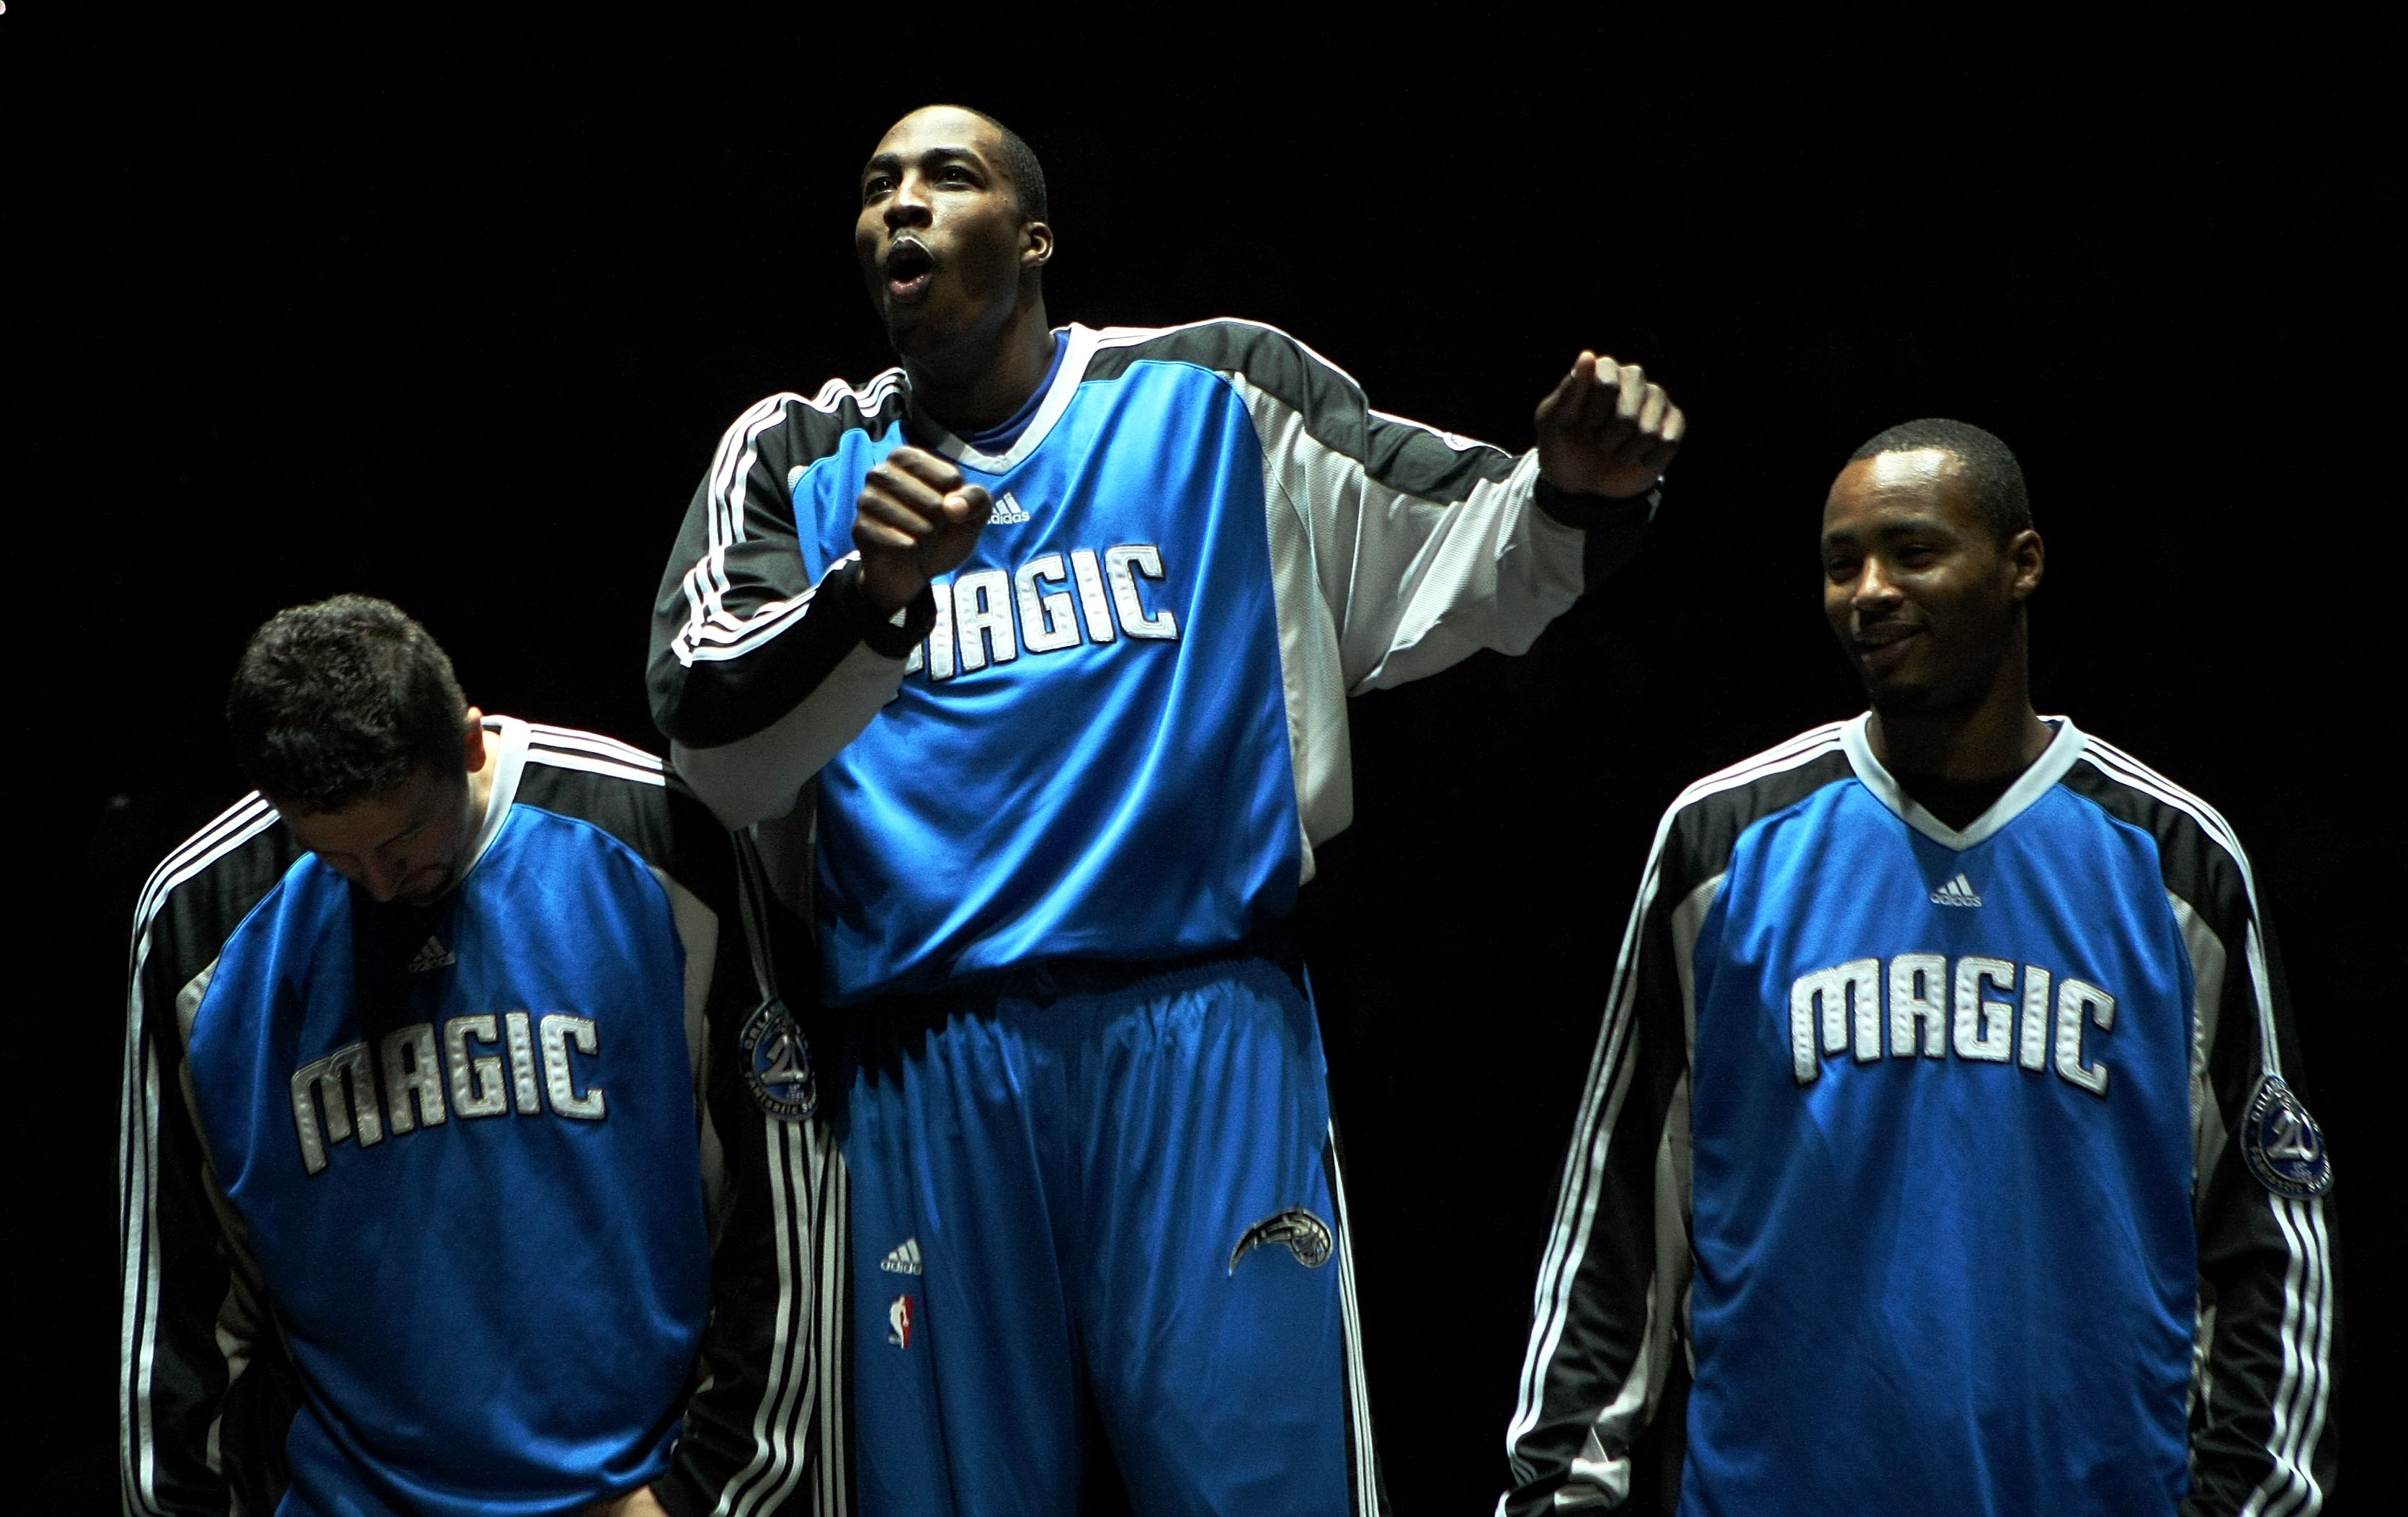 ORLANDO, FL - OCTOBER 29:  Dwight Howard #12 of the Orlando Magic dances as he is introduced along with teammates Hedo Turkoglu #15  (L) and Rashard Lewis #9 before taking on the Atlanta Hawks at Amway Arena on October 29, 2008 in Orlando, Florida. The Ha